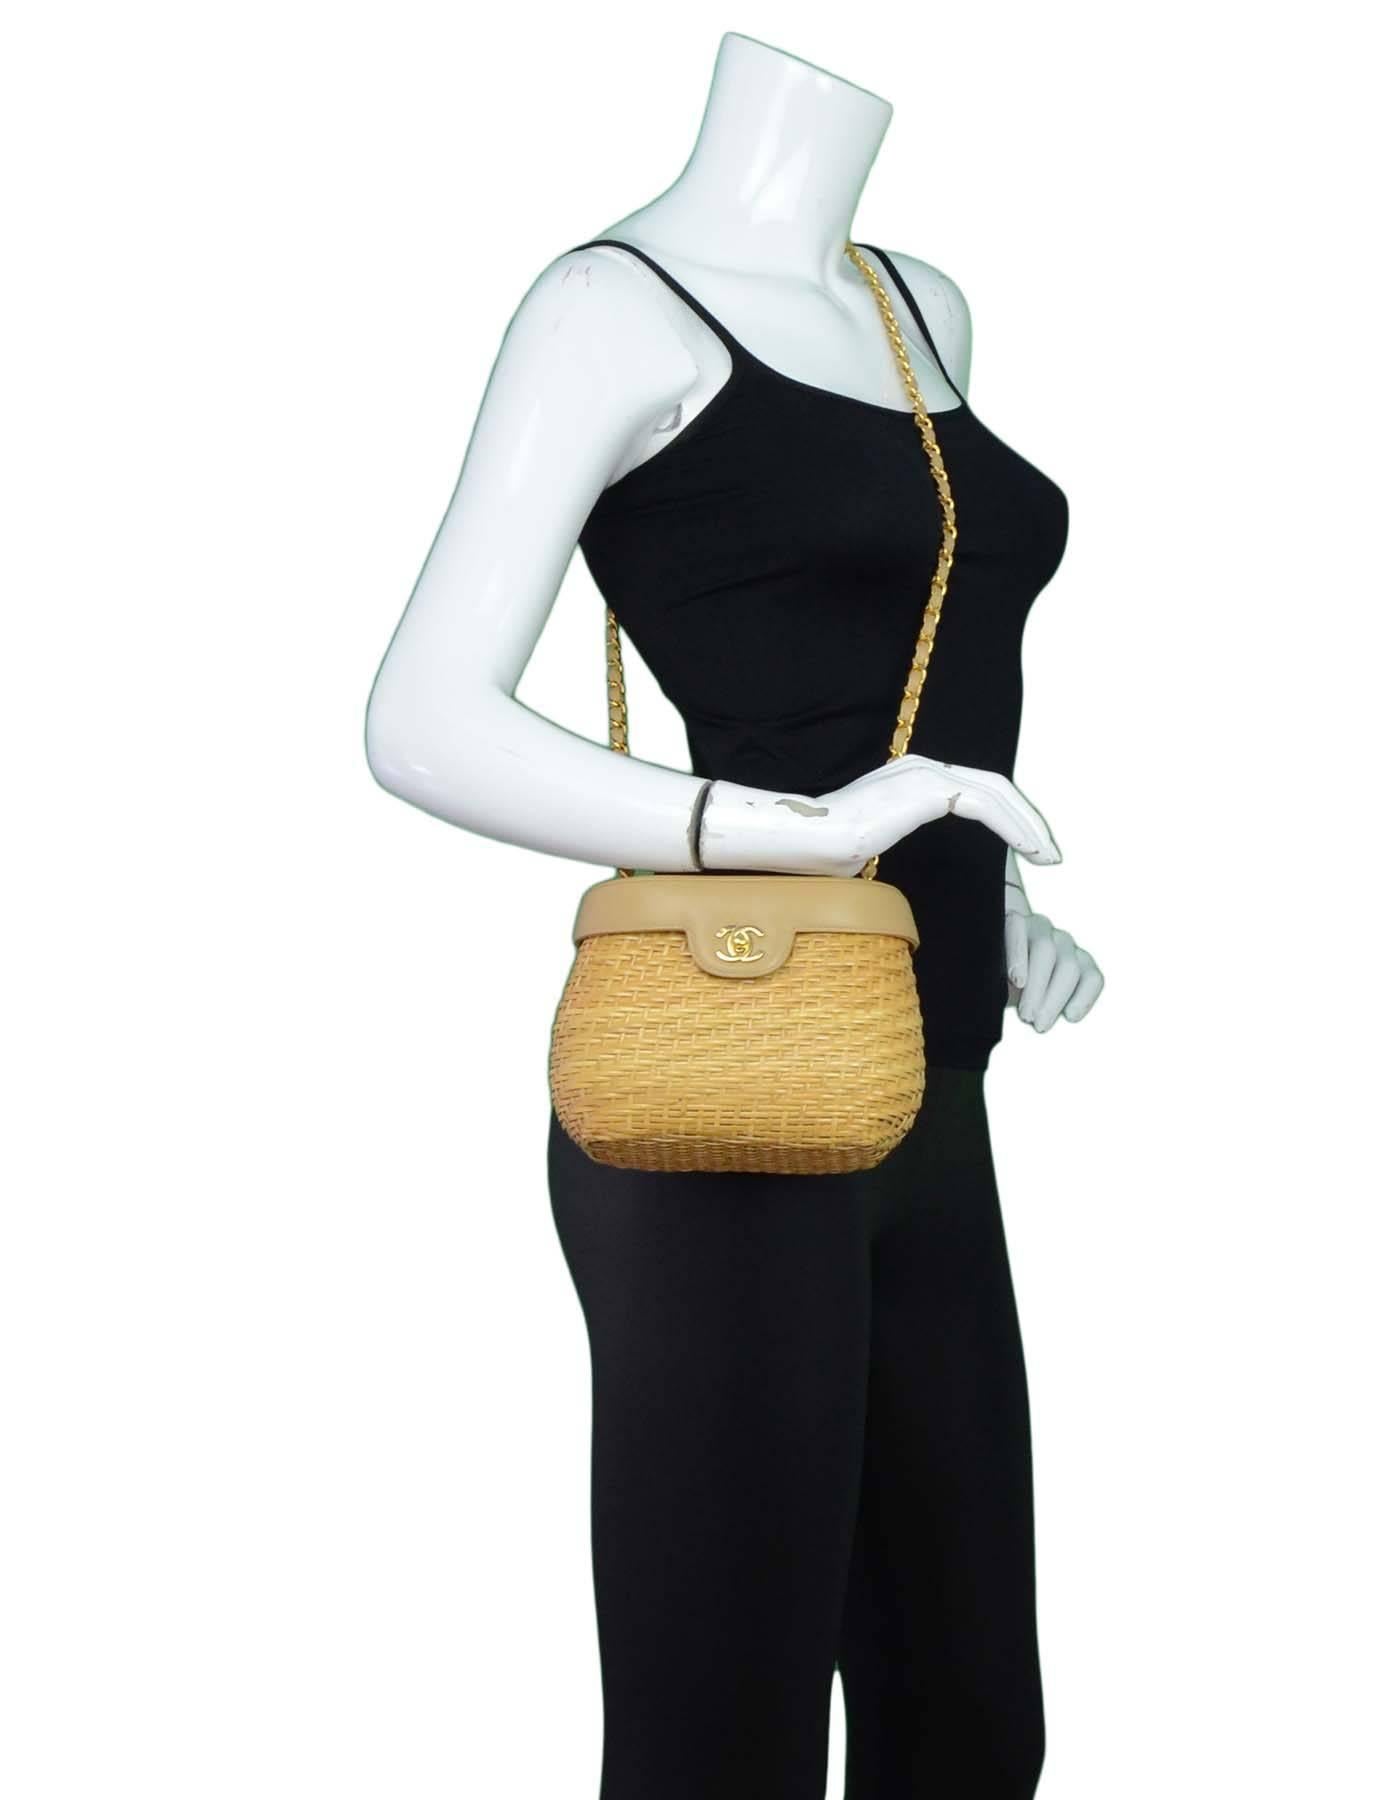 100% Authentic RARE Chanel Vintage Wicker Basket Crossbody Bag features leather flap top with signature goldtone CC twist lock closure.

Made In: Italy
Year of Production: 1997-1999
Color: Tan
Hardware: Goldtone
Materials: Wicker and